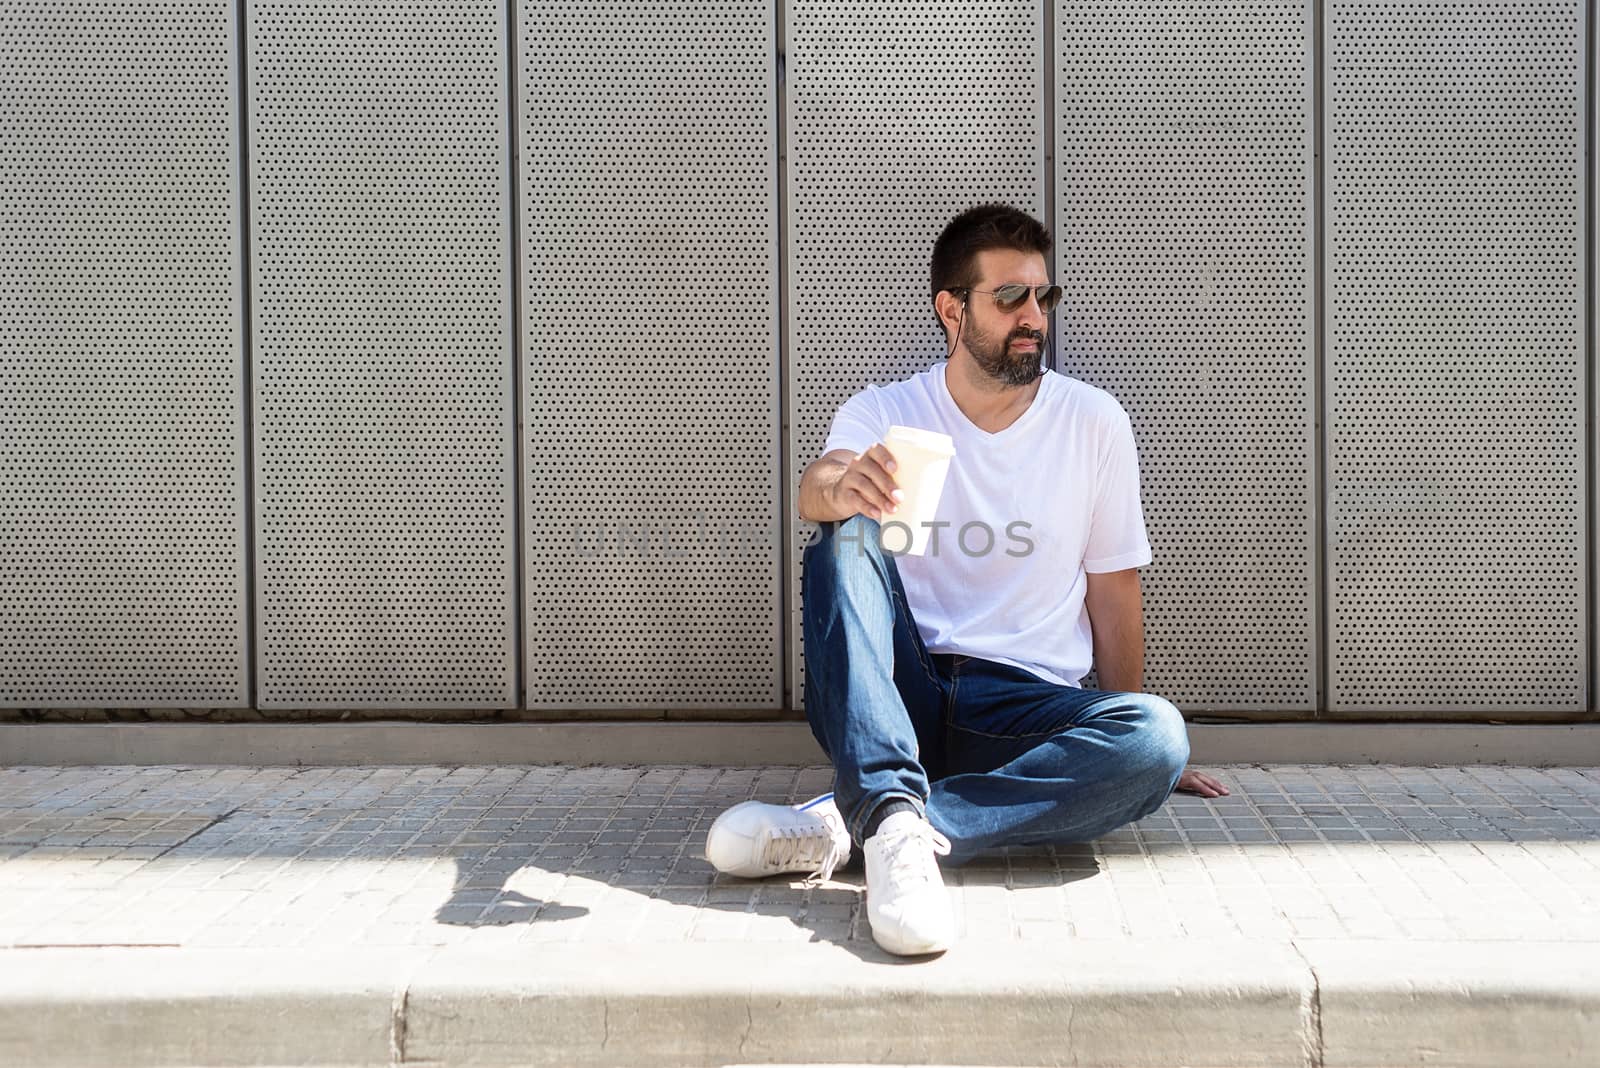 Bearded guy with sunglasses sitting on ground while holding a take away coffee